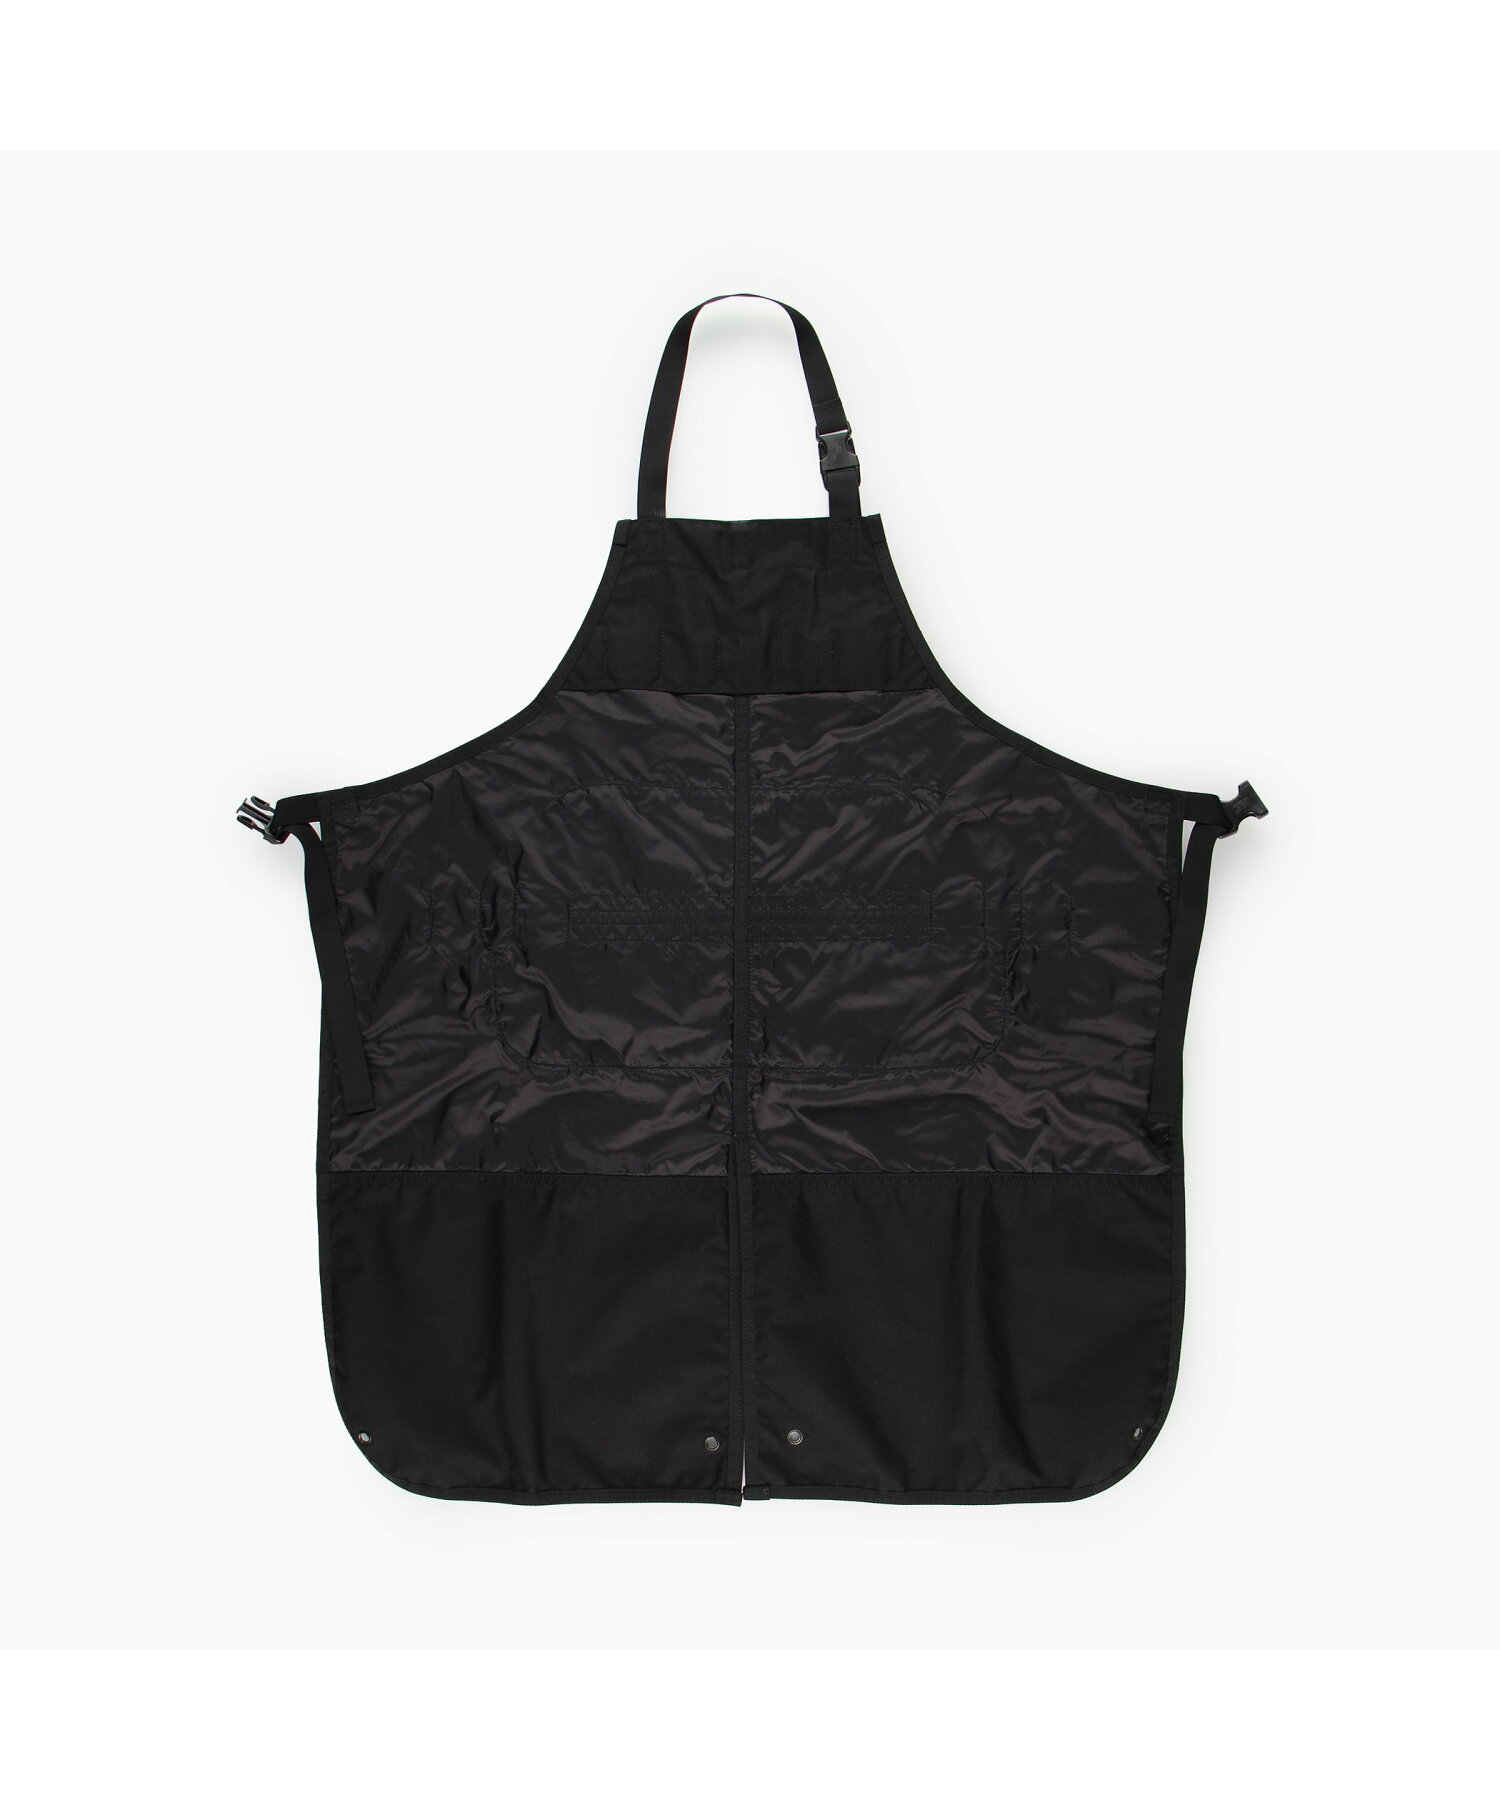 【BRIEFING/ブリーフィング】TOOL APRON